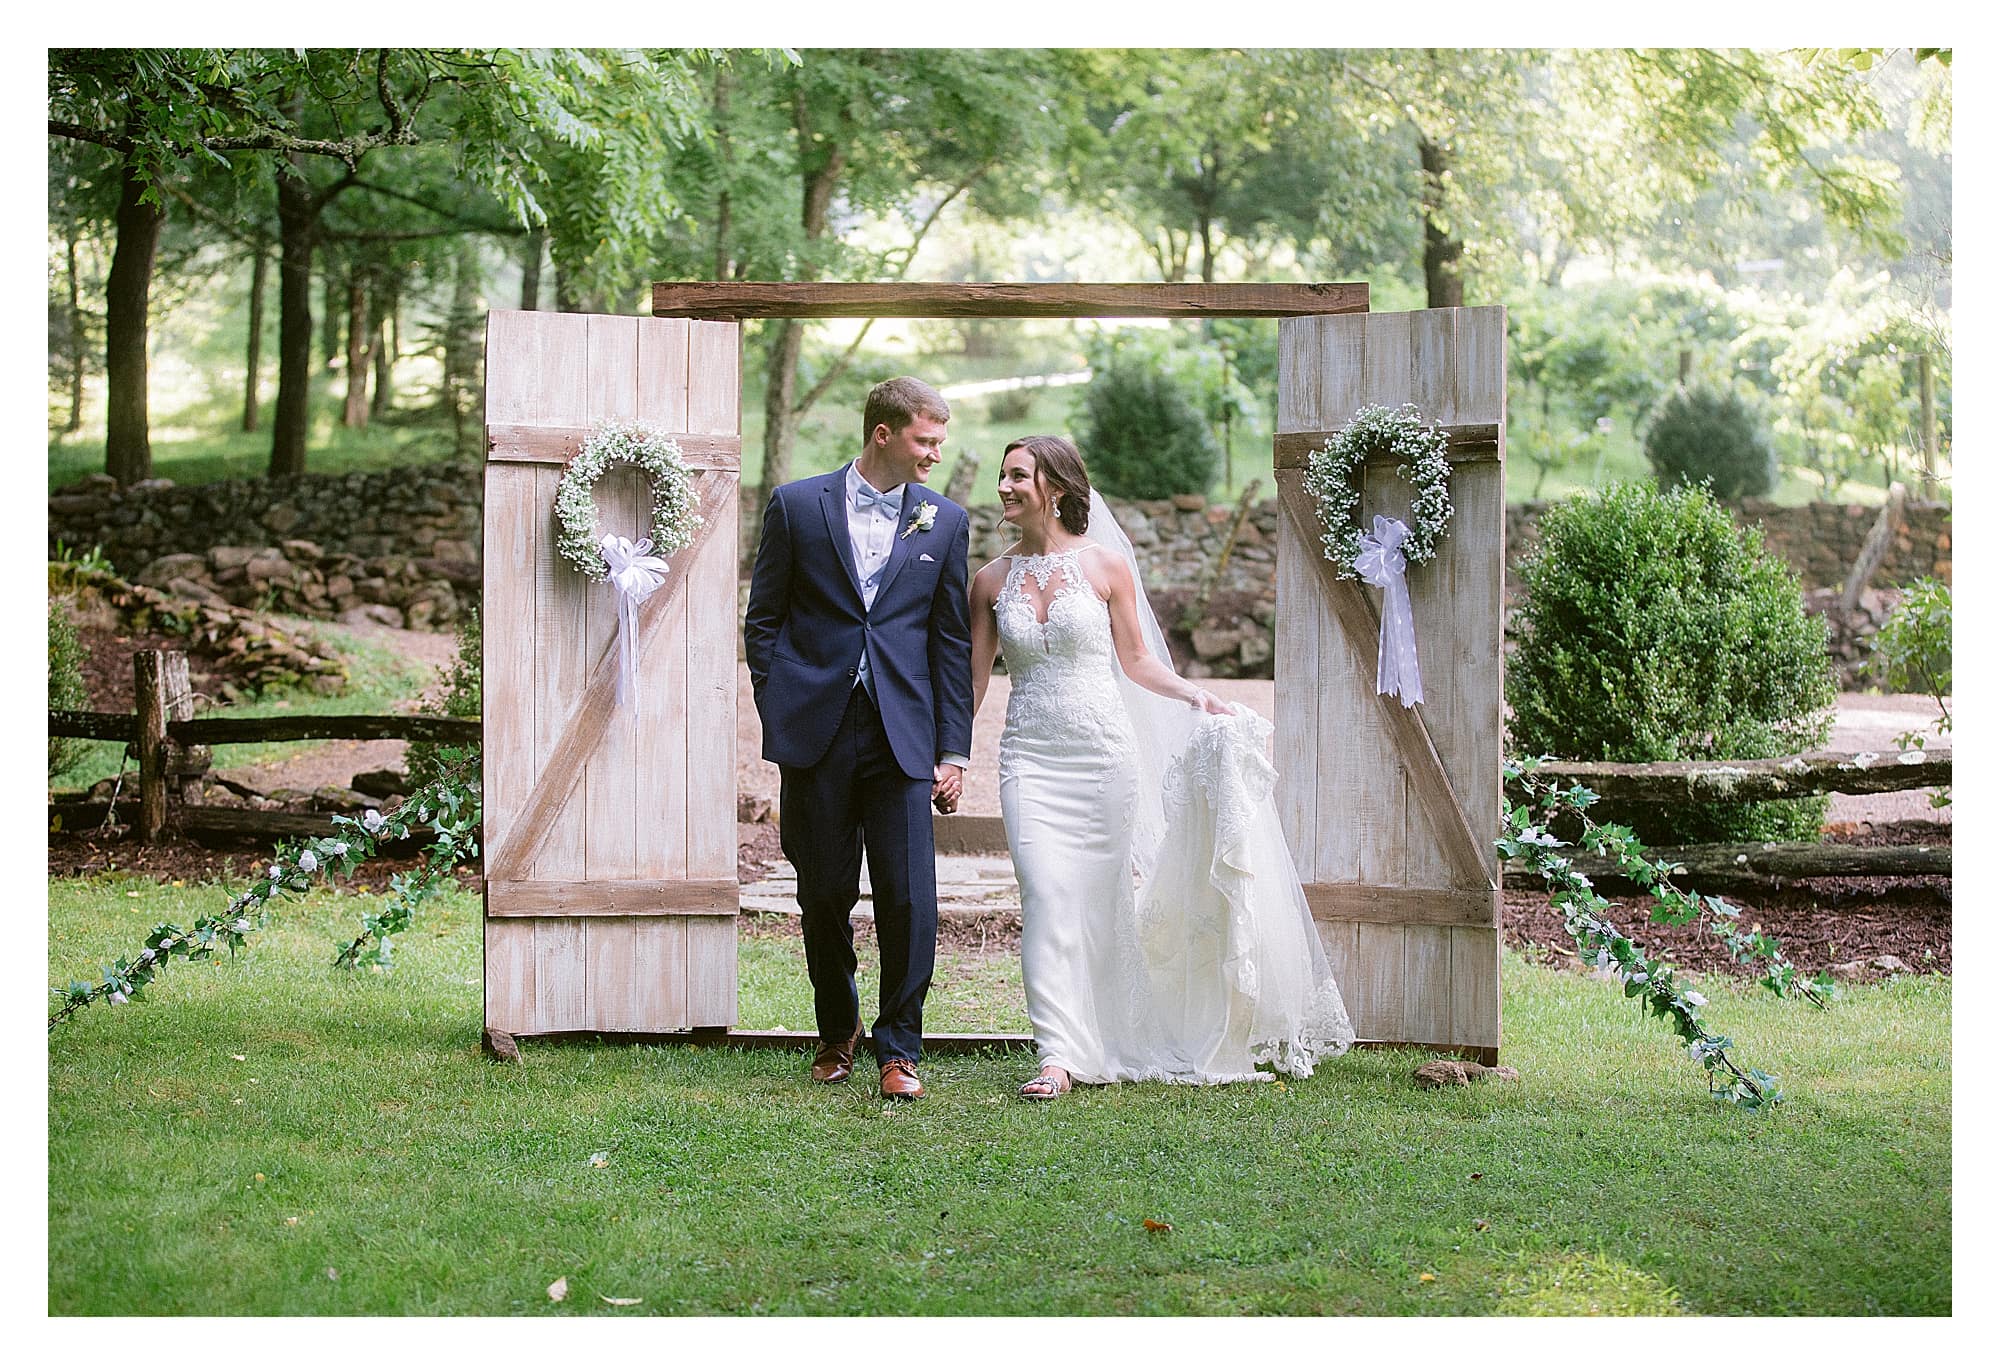 Bride and groom holding hangs walking through decorated wooden doors outside